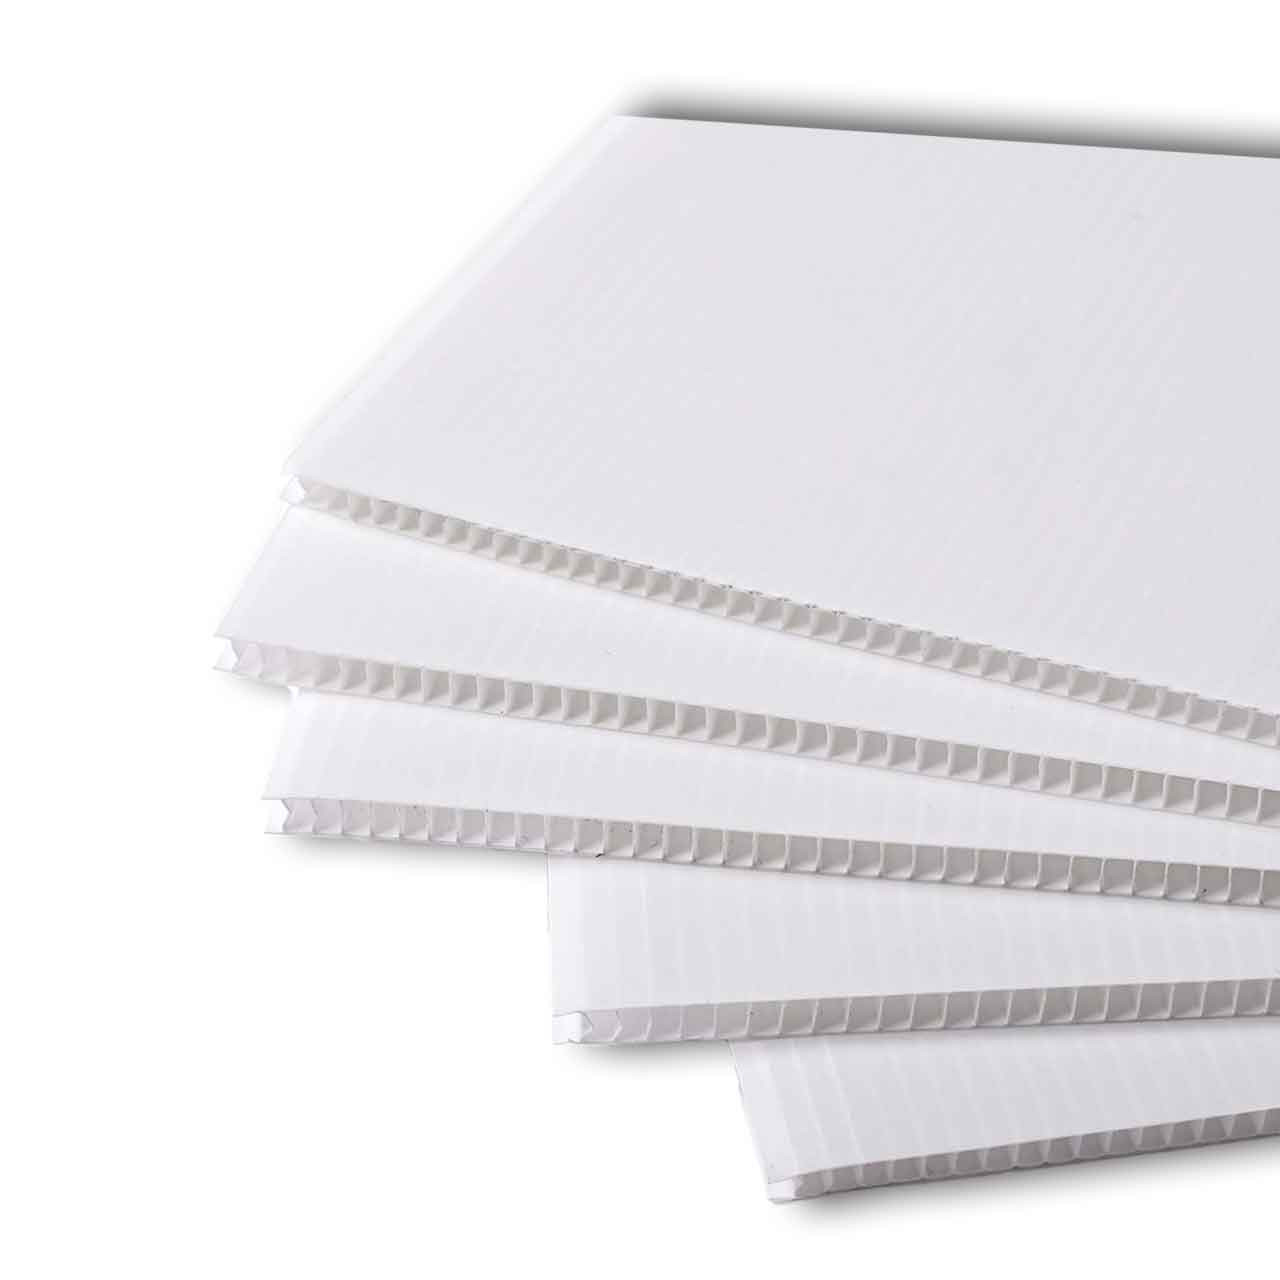 High Quality, Fluted Polypropylene Sheets